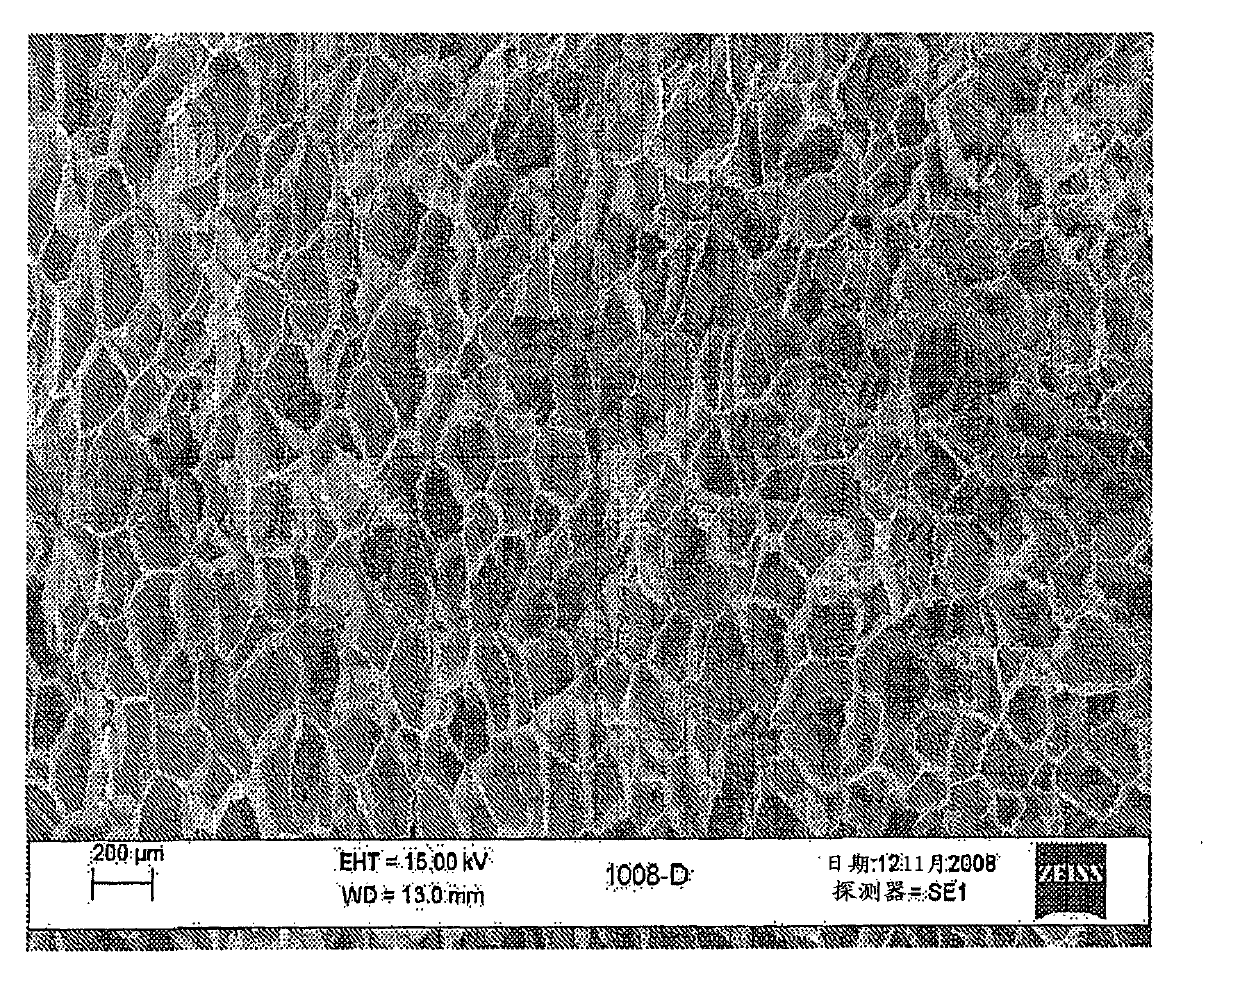 Porous carbon-containing compounds as water carriers and cell size controlling agents for polymeric foams